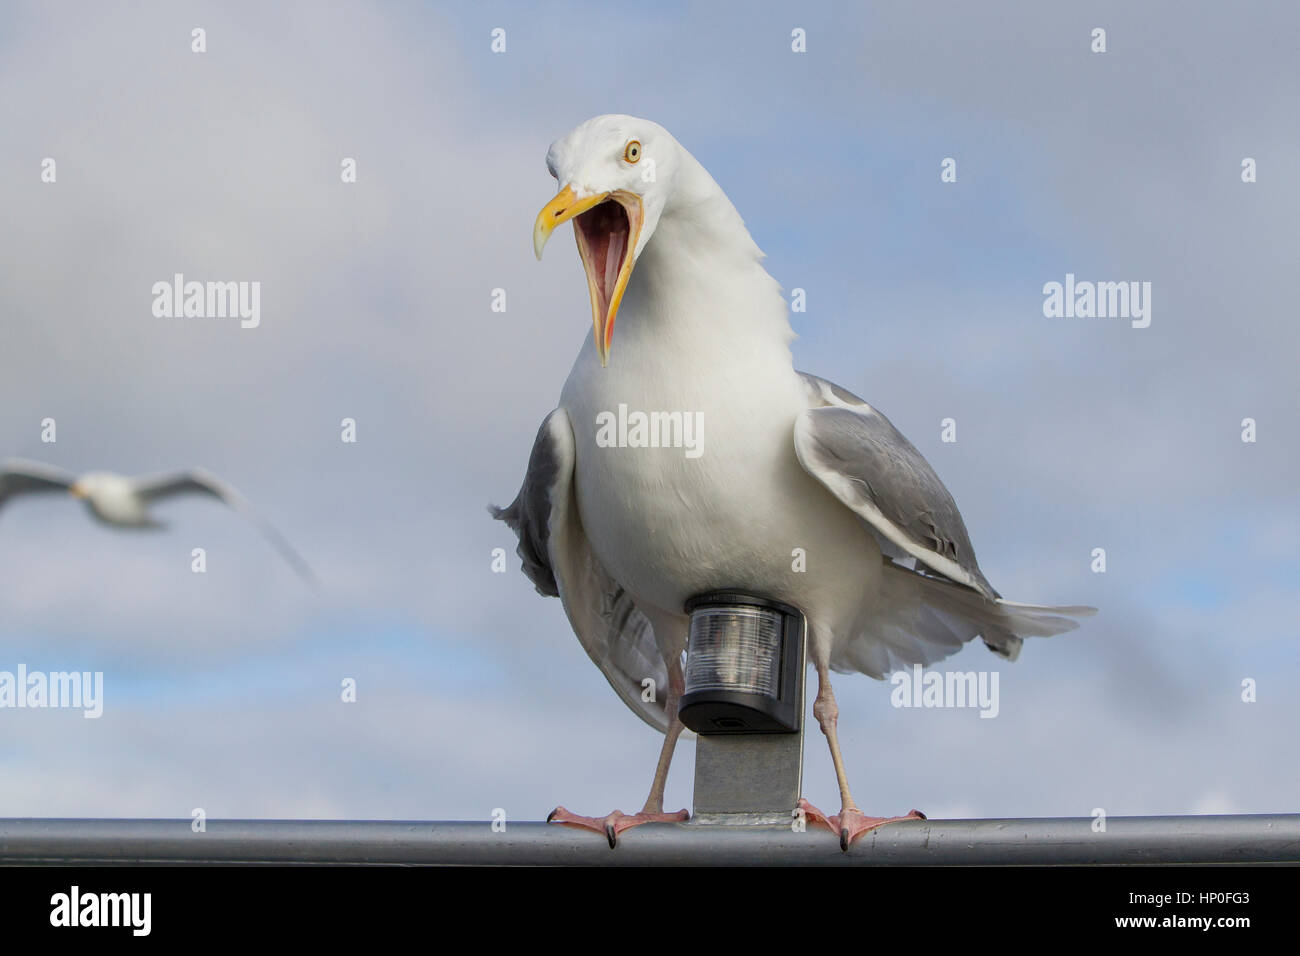 Herring gull (Larus argentatus) landing in a painful position astride the running light on a boat Stock Photo